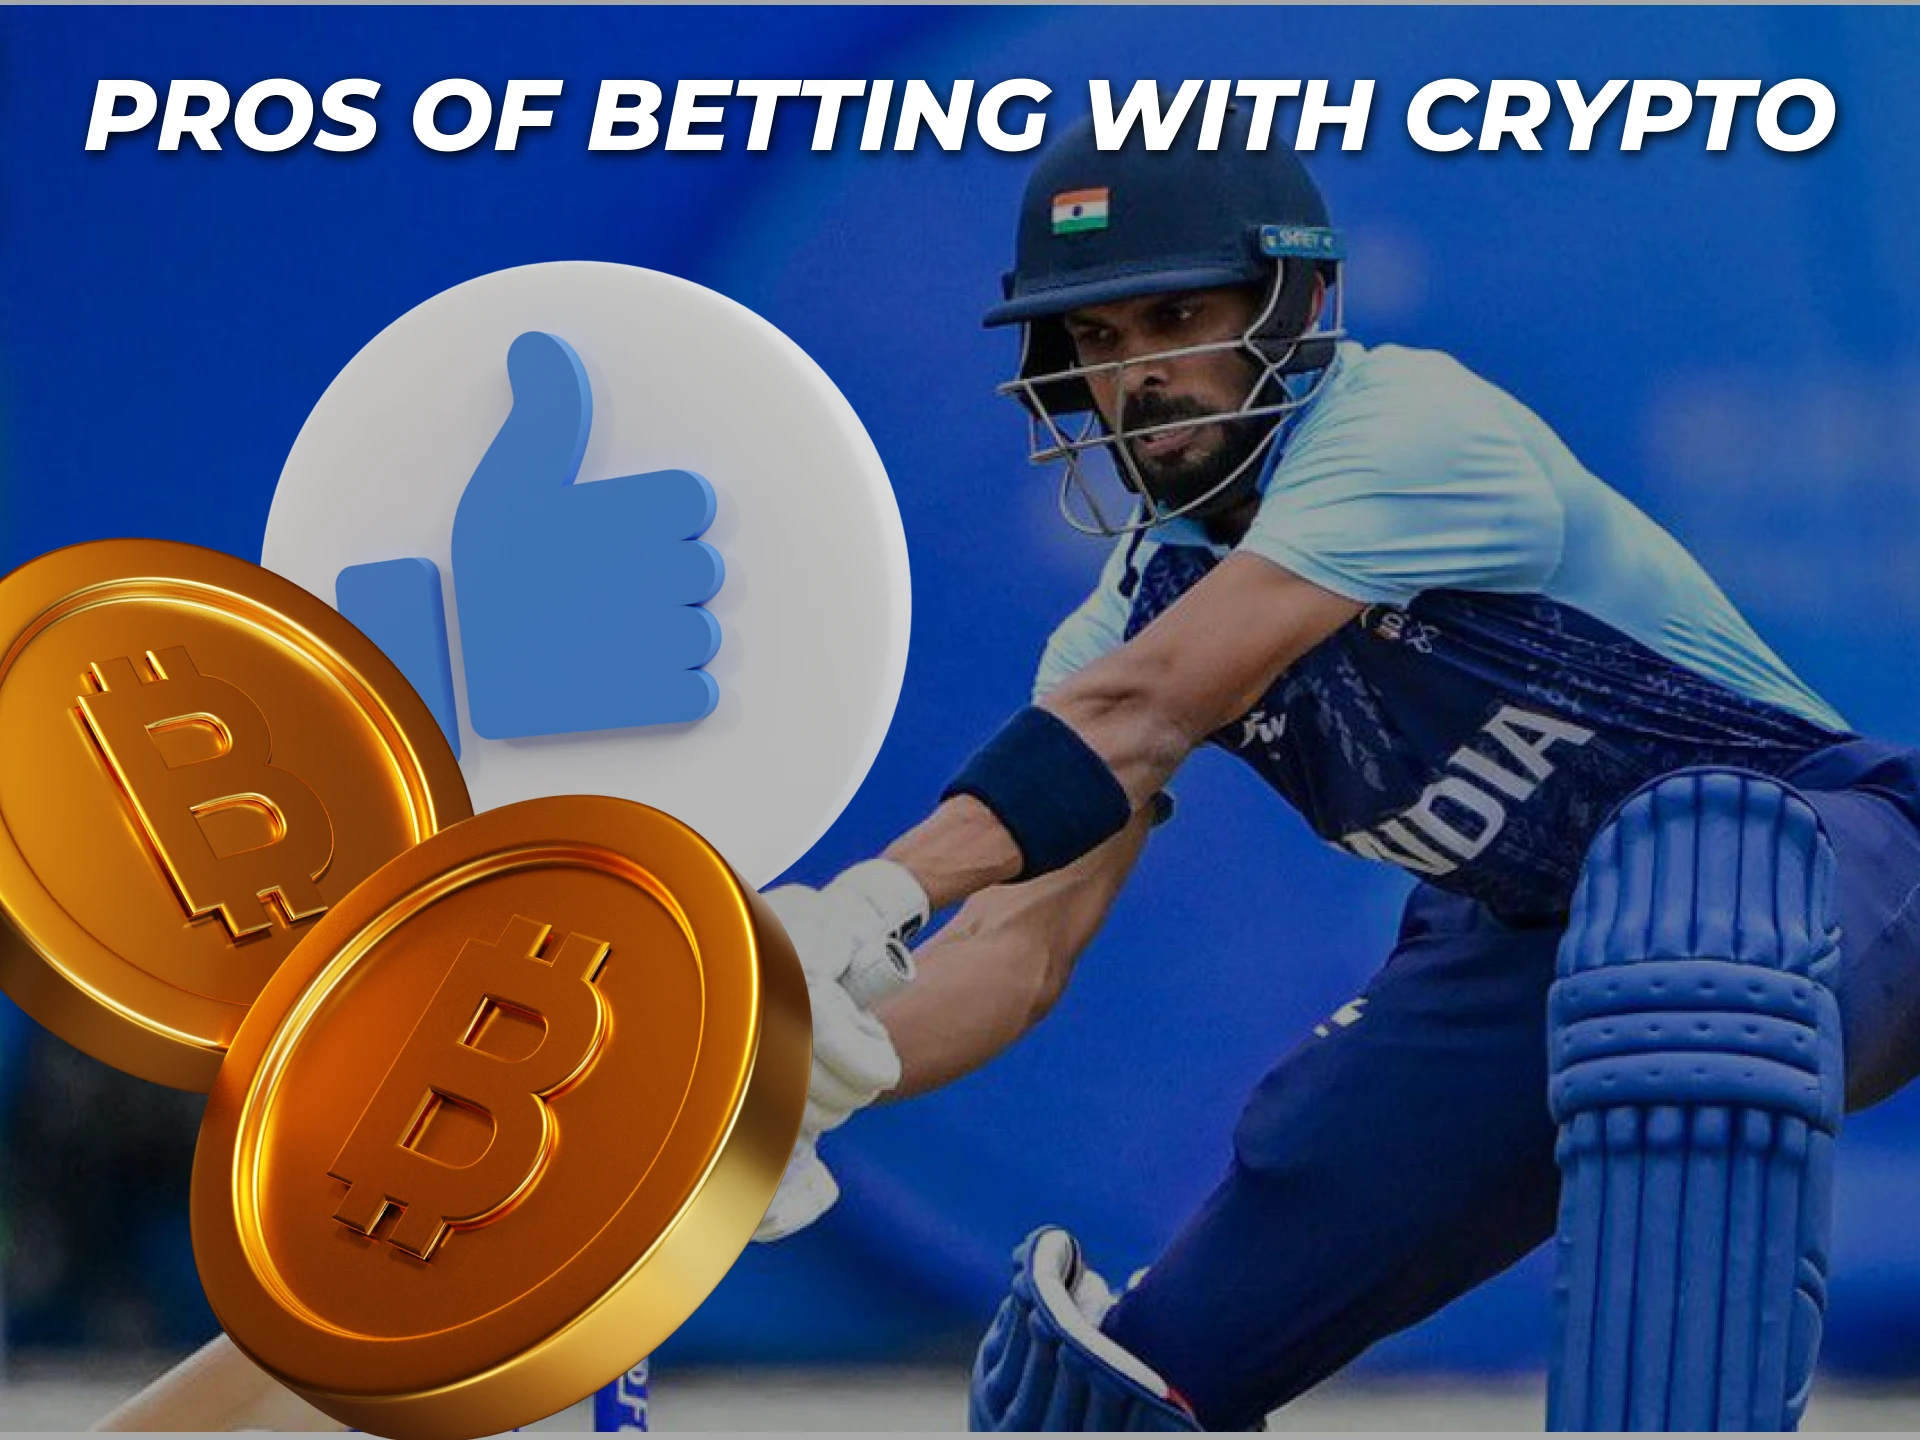 There are many benefits to betting on sports using cryptocurrency.